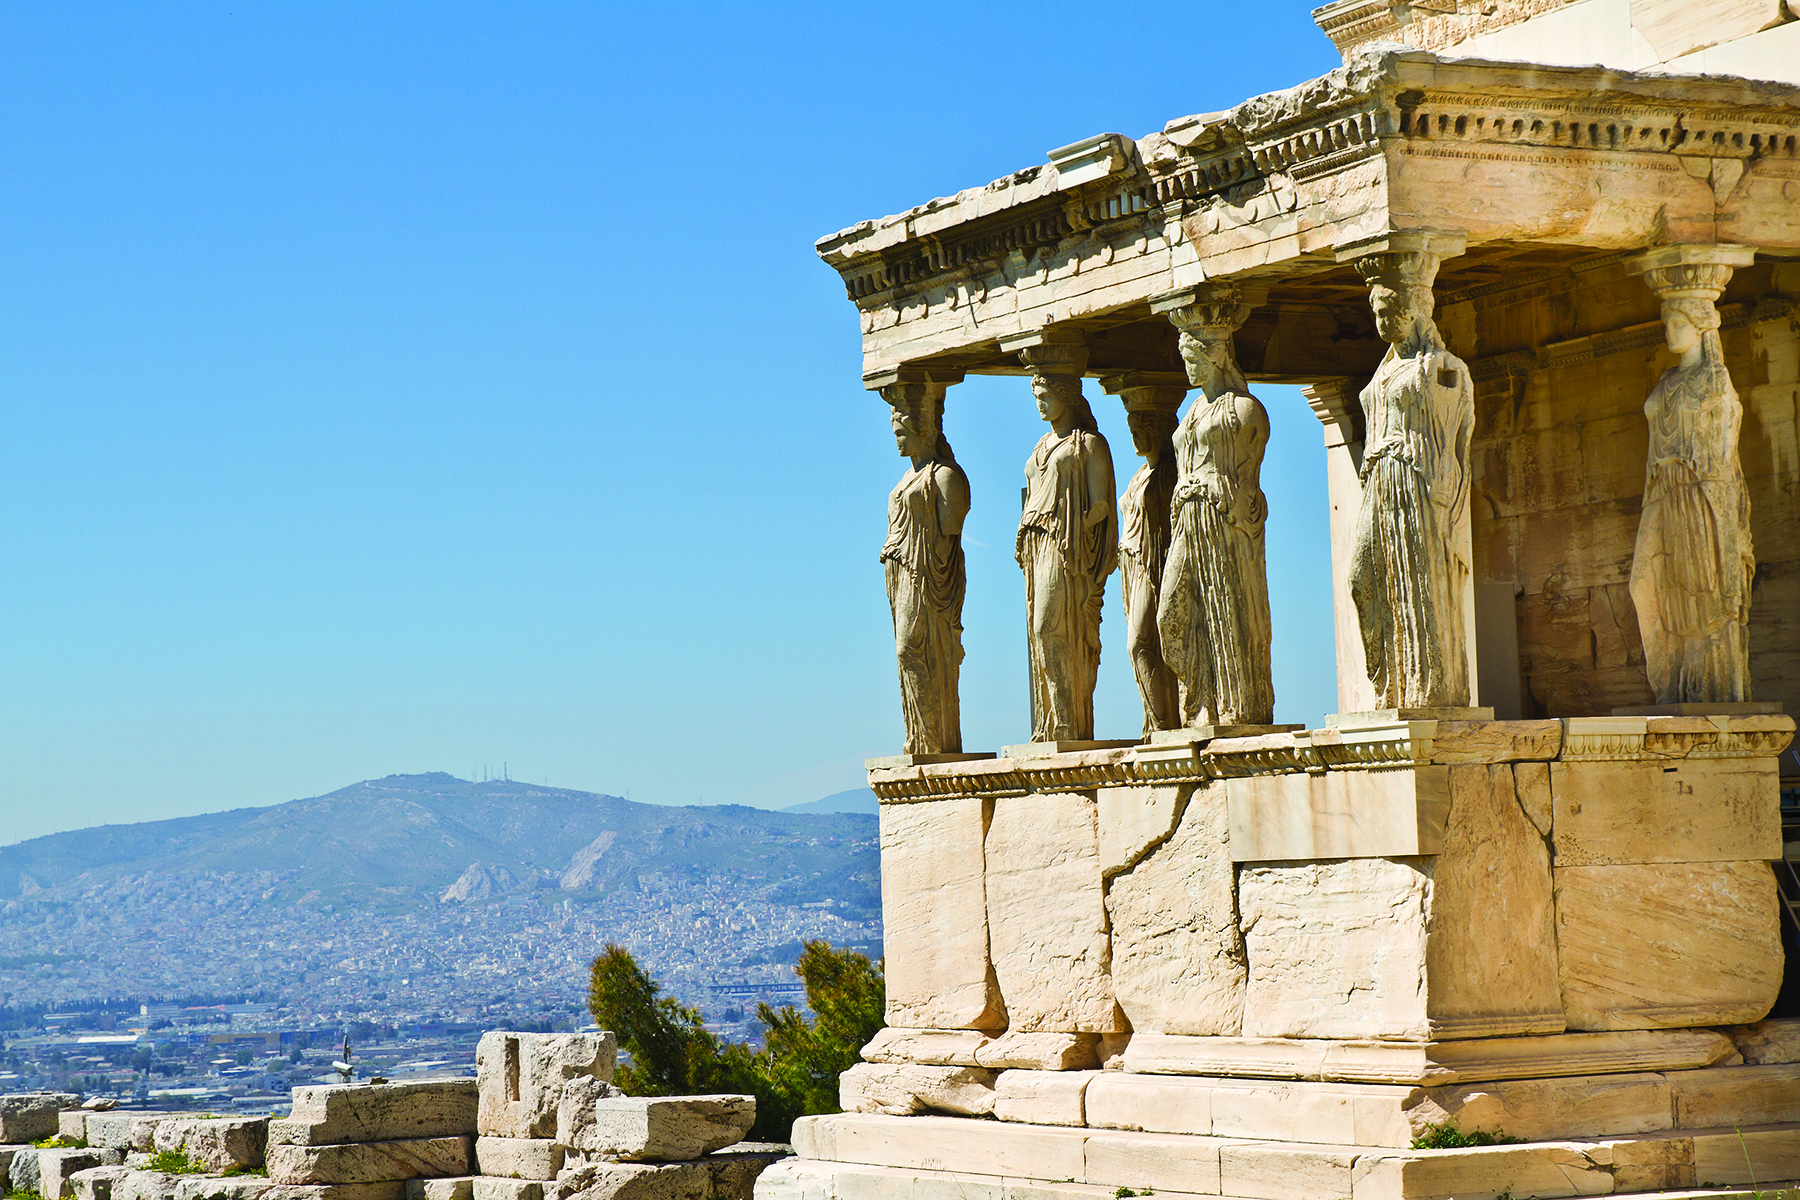 The Caryatid porch in Athens, Greece.